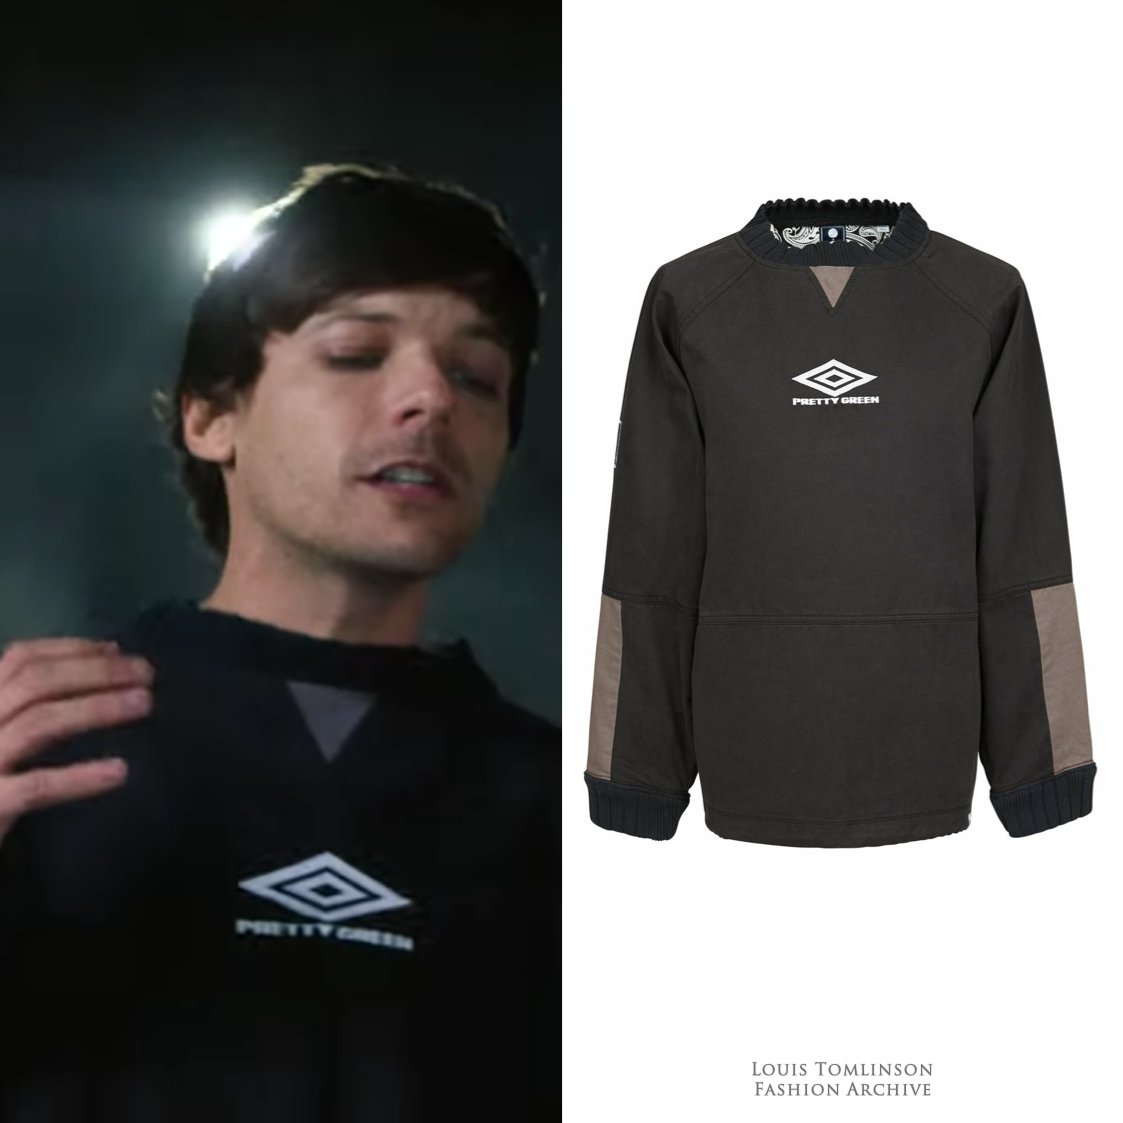 Louis Fashion Archive on Twitter: "Louis wore a Green x @umbro Drill ($90 - sold out) in the #DontLetItBreakYourHeart video. https://t.co/Y60yzsCeGQ https://t.co/odoVEPcPVO" / Twitter